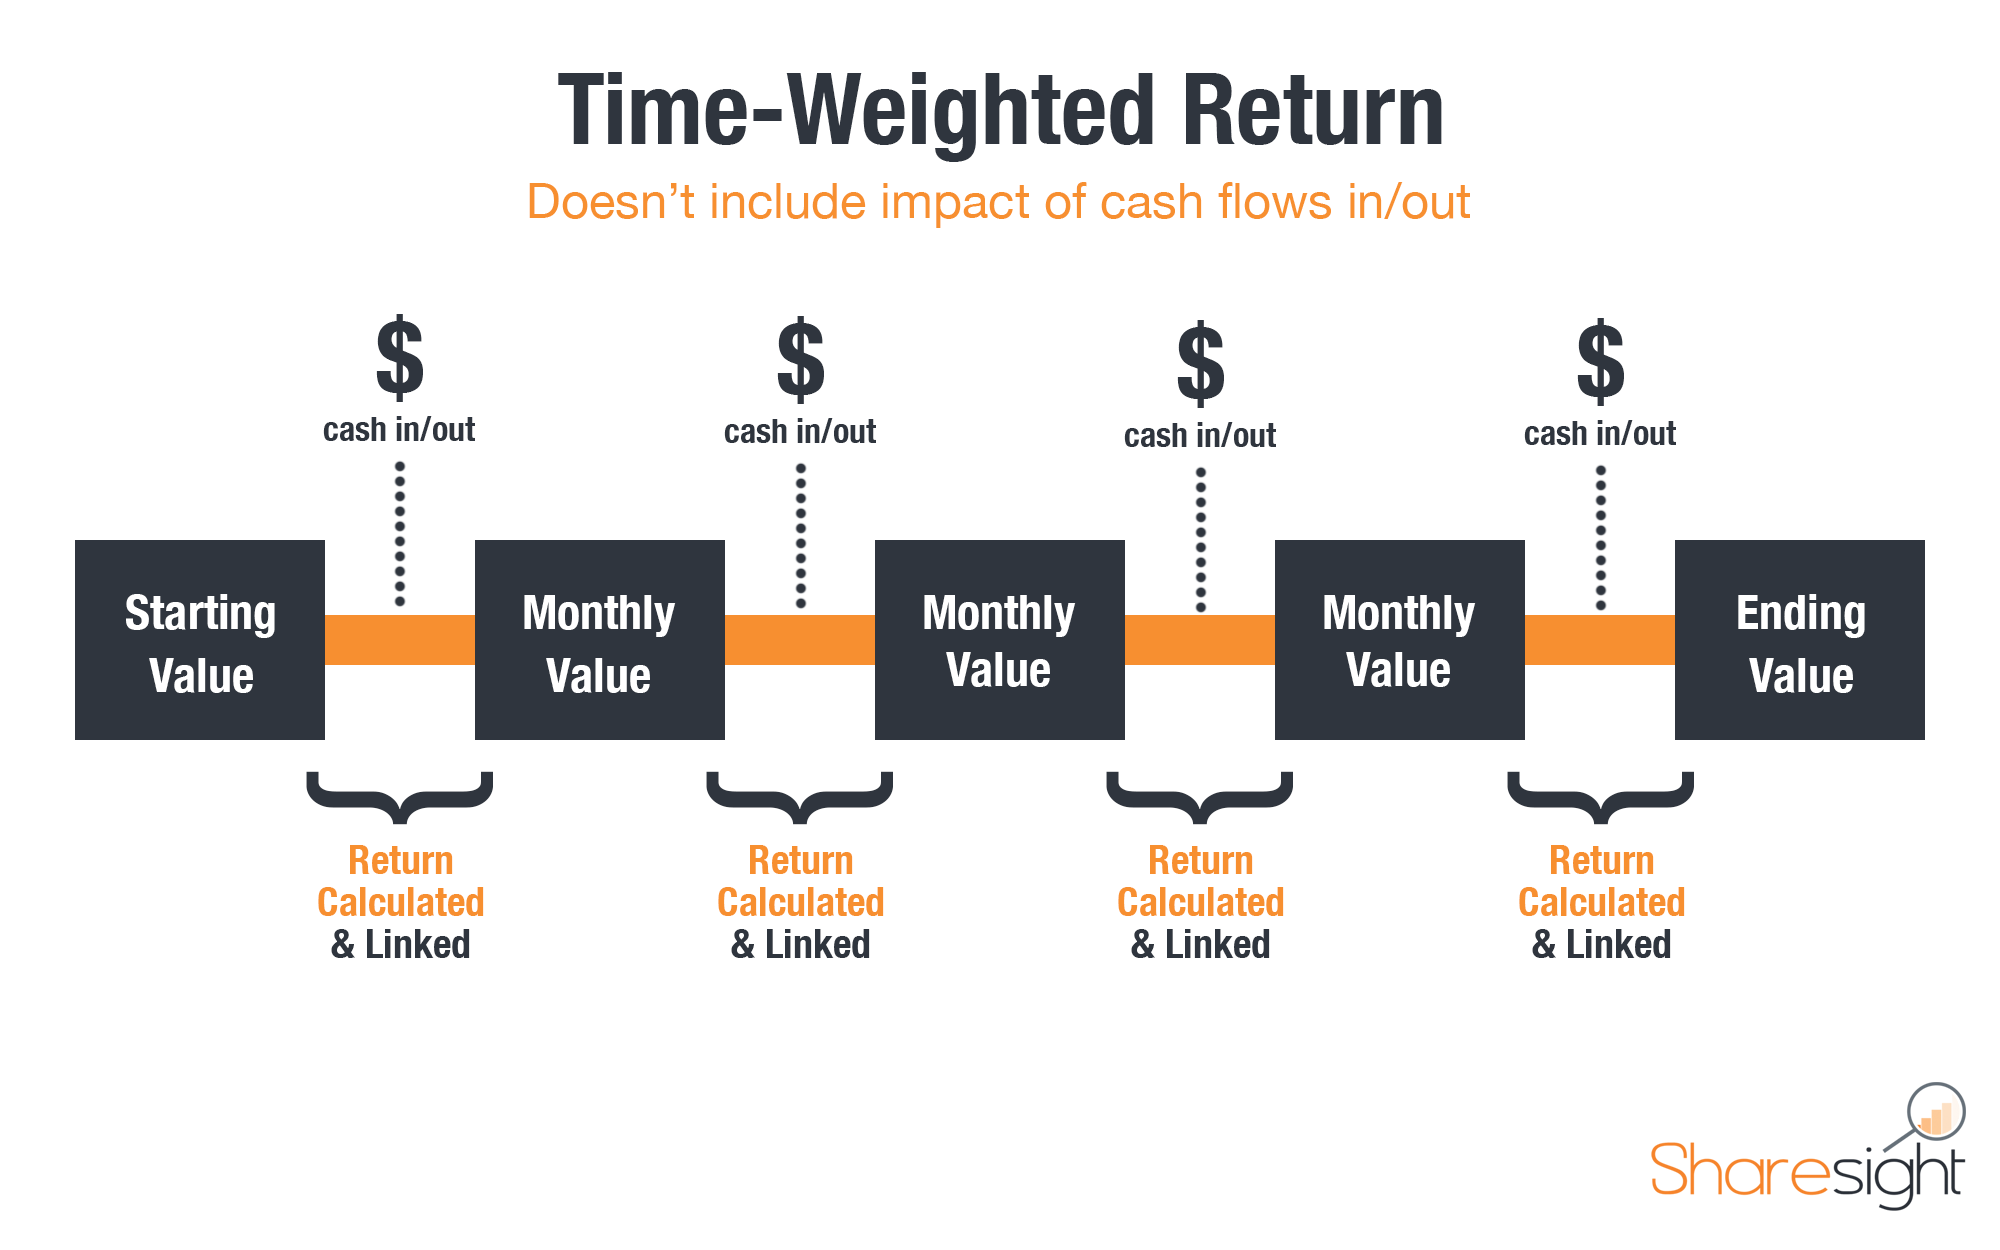 Time-Weighted Return